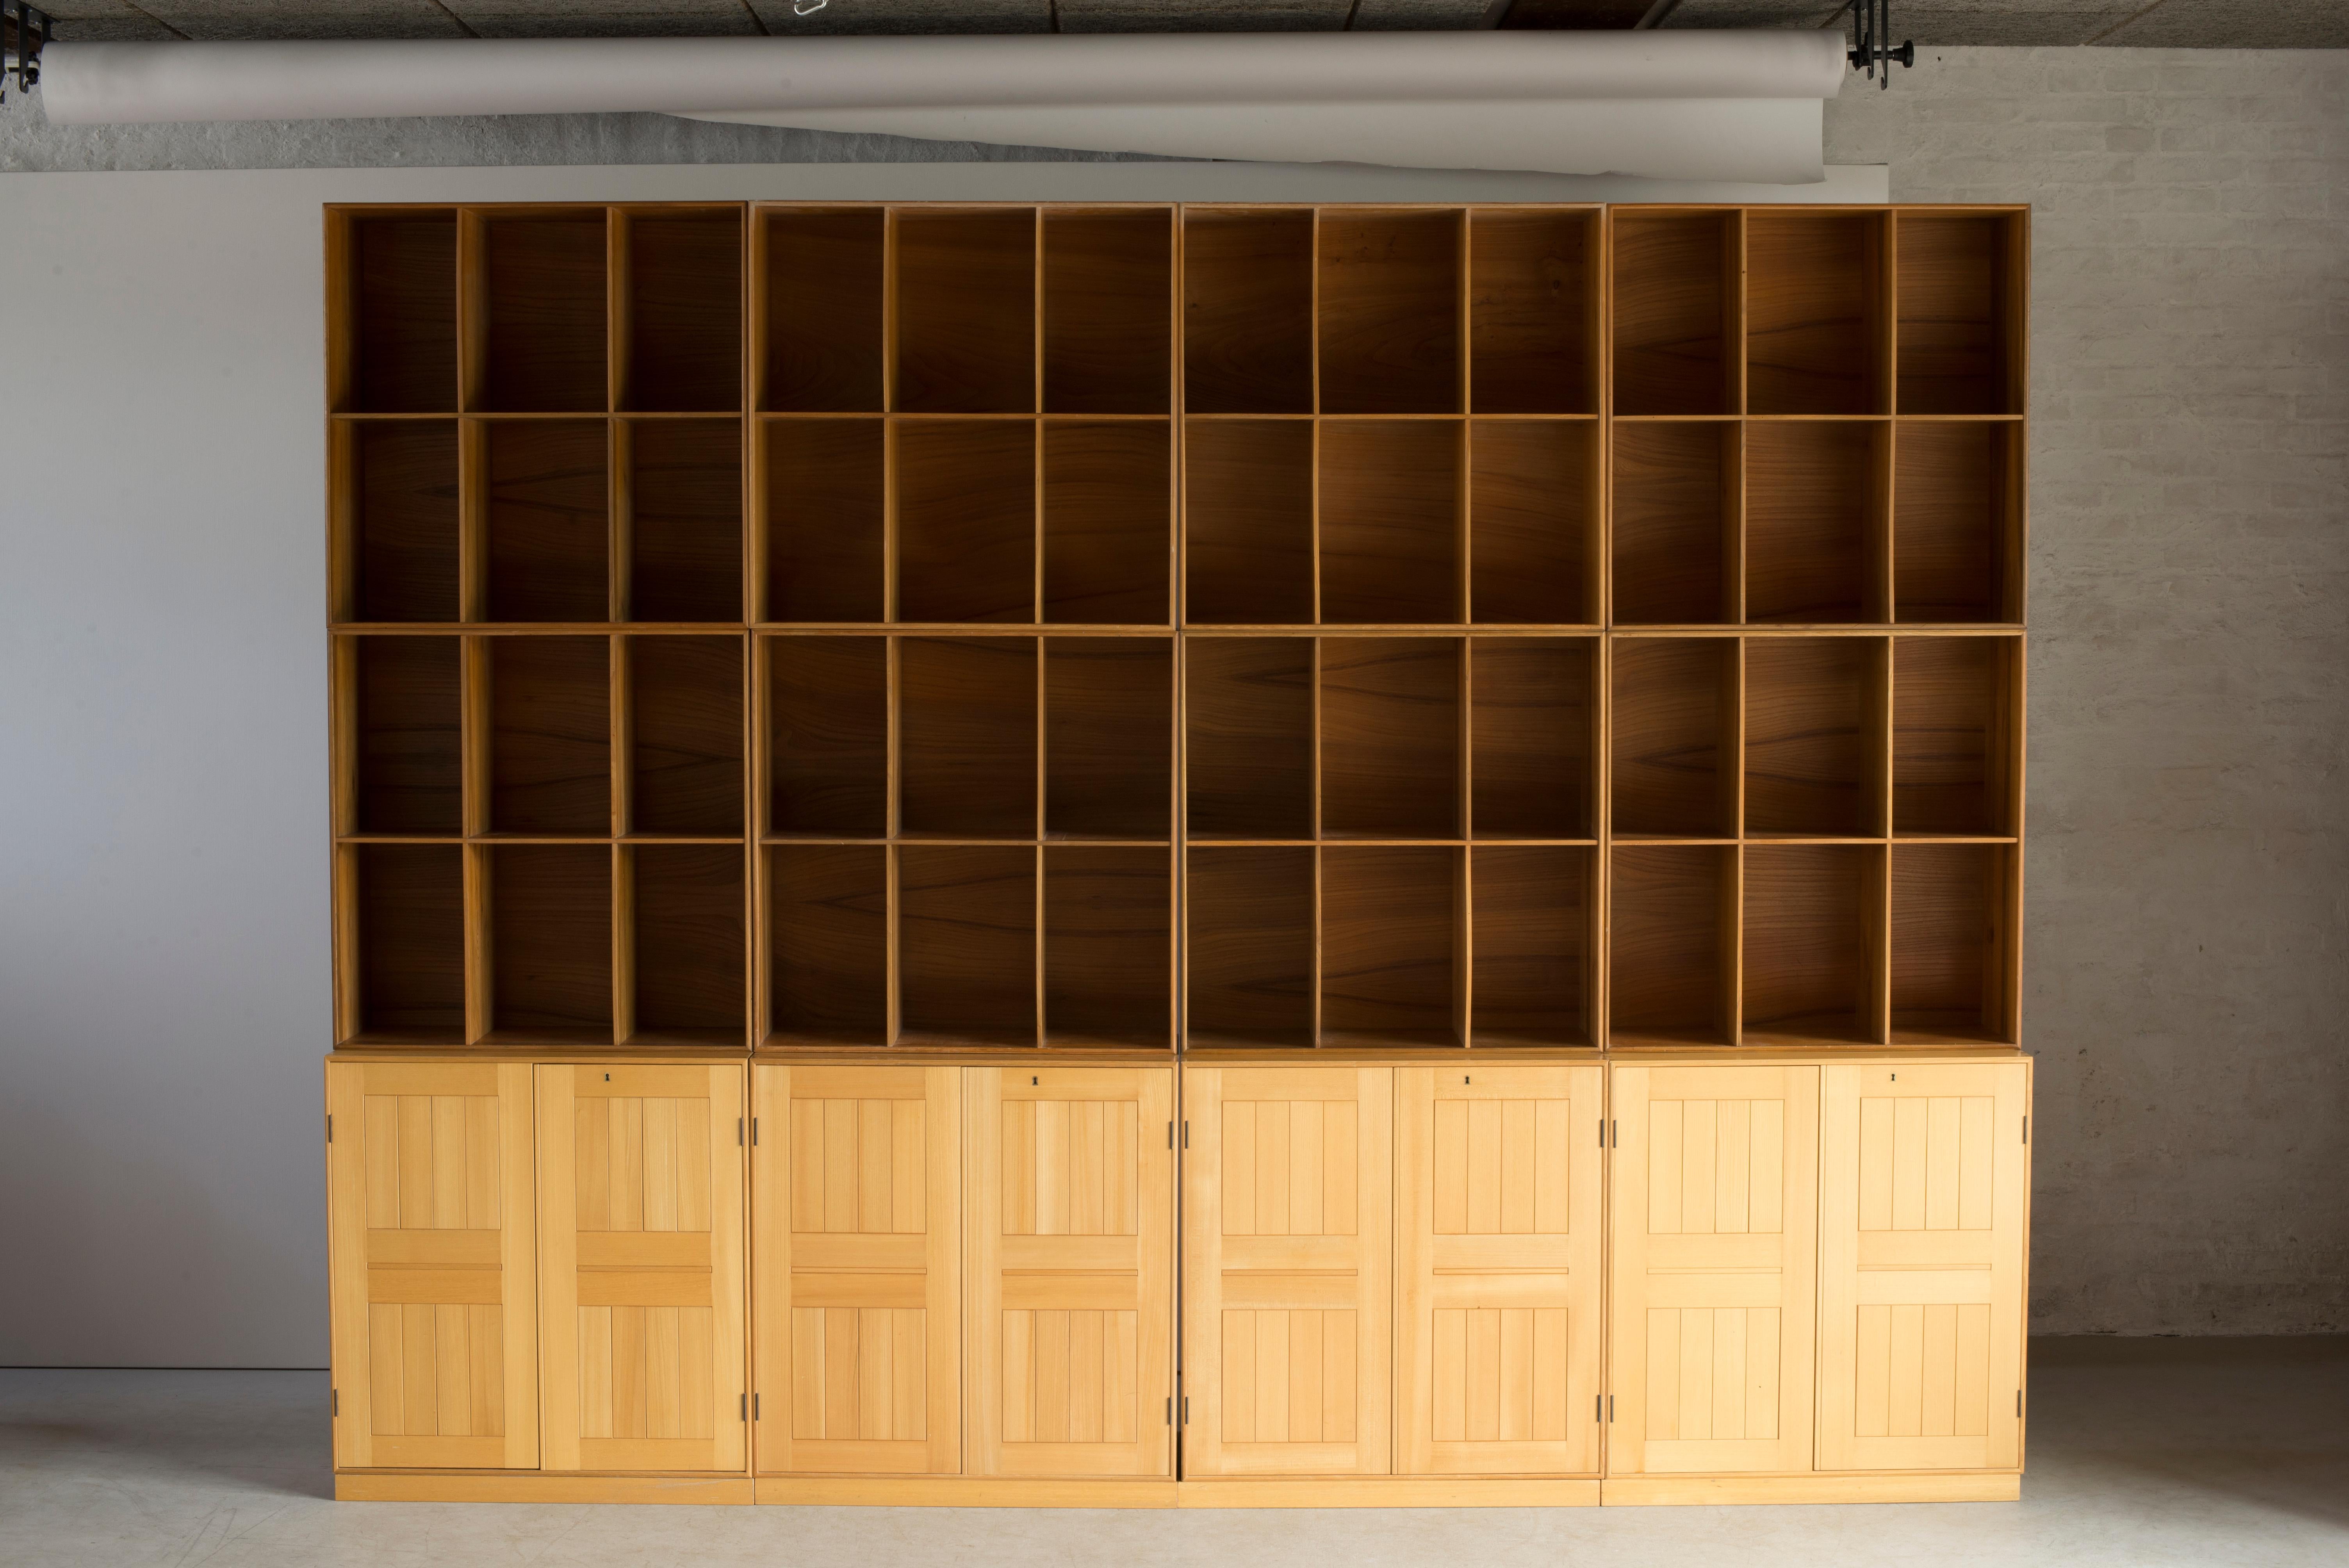 Mogens Koch cabinets and bookcases in elm. Executed by Rud Rasmussen

Reverse with paper labels ‘RUD. RASMUSSENS/SNEDKERIER/KØBENHAVN/DENMARK.